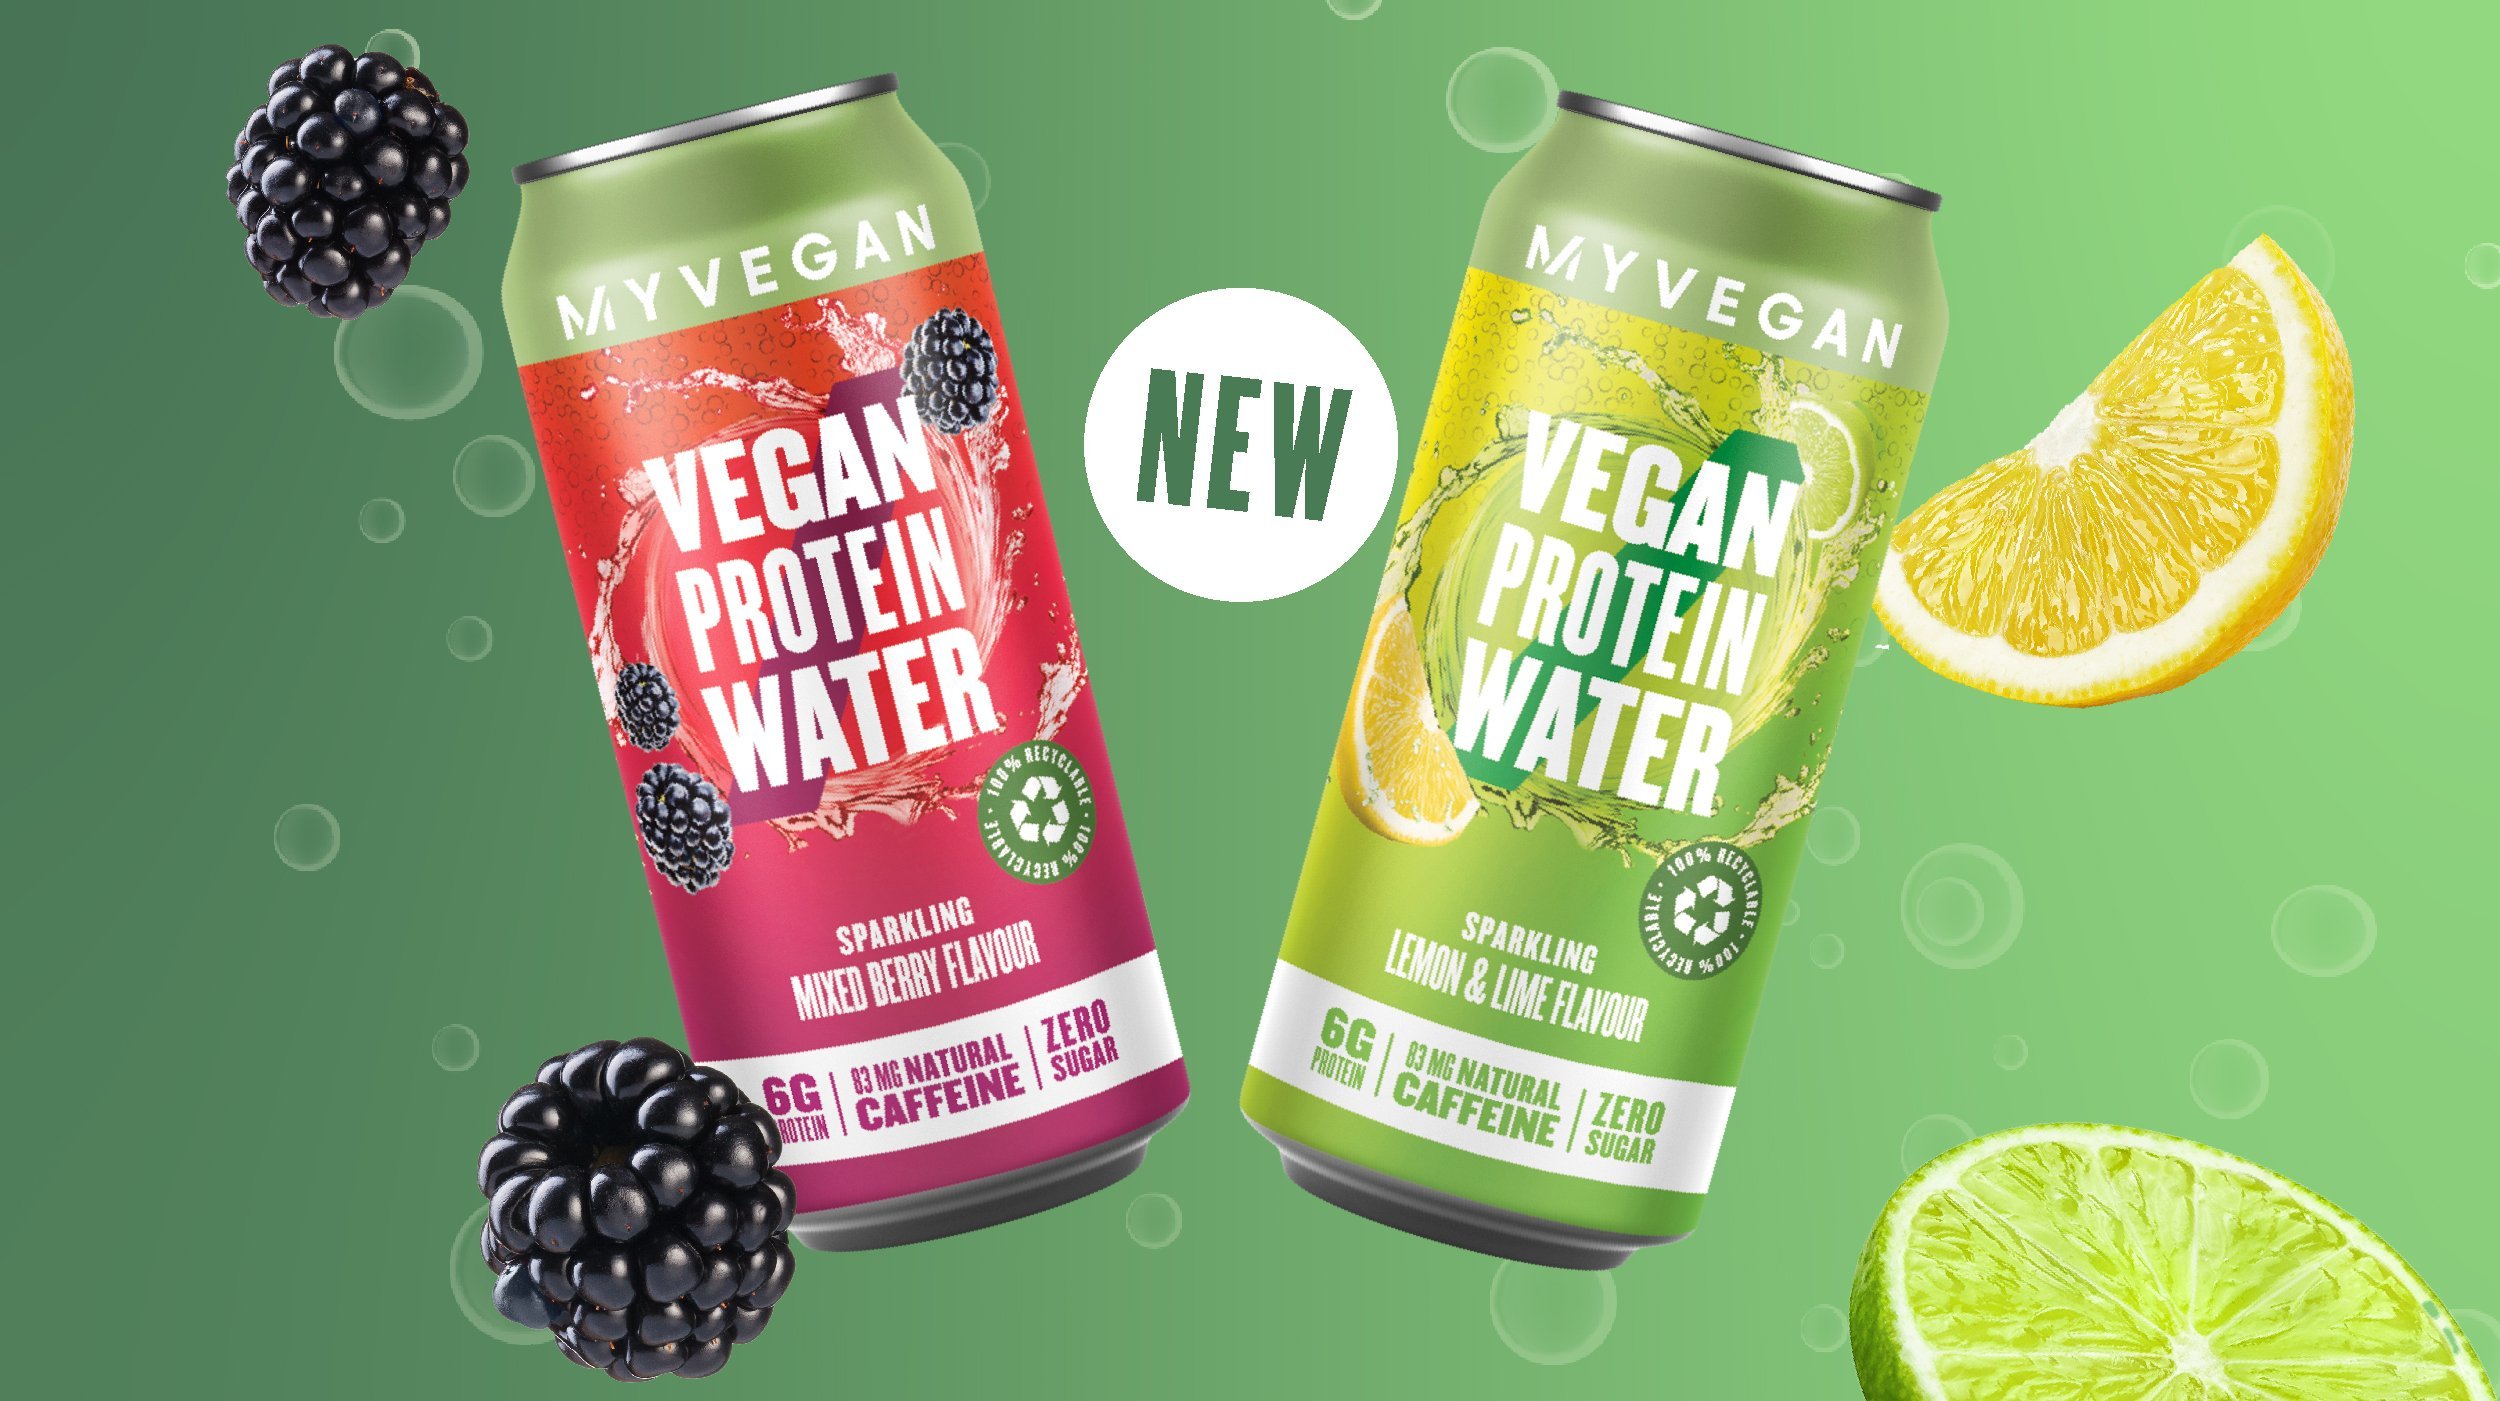 Introducing our Sparkling Protein Waters